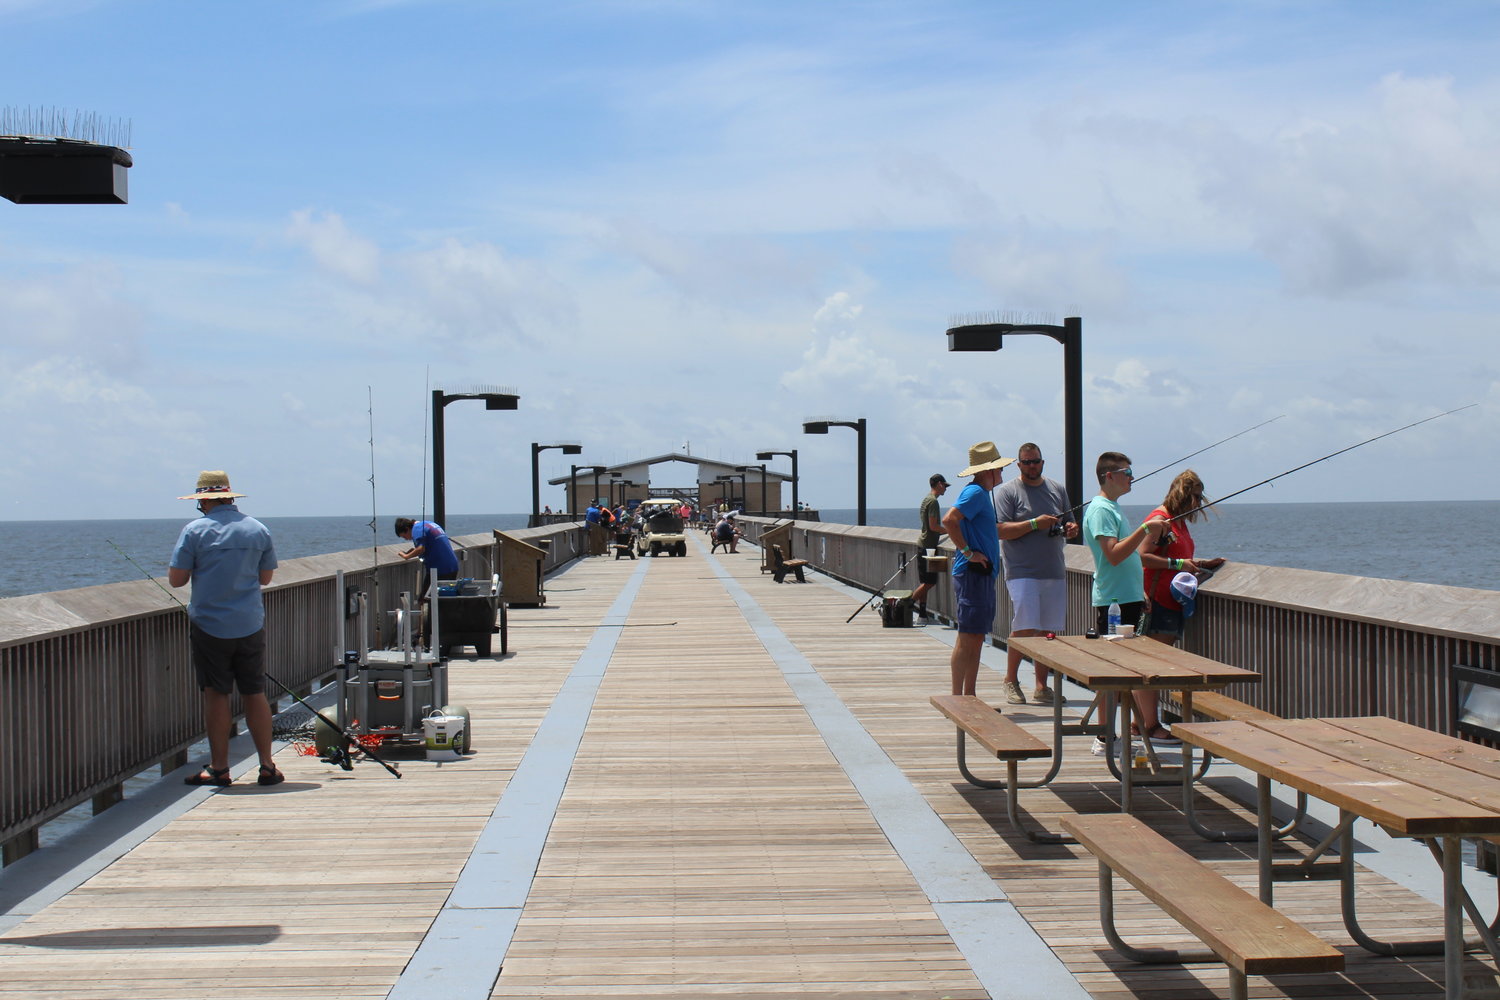 Gulf State Park Pier repair is currently in the permitting phase with the U.S. Army Corps of Engineers.